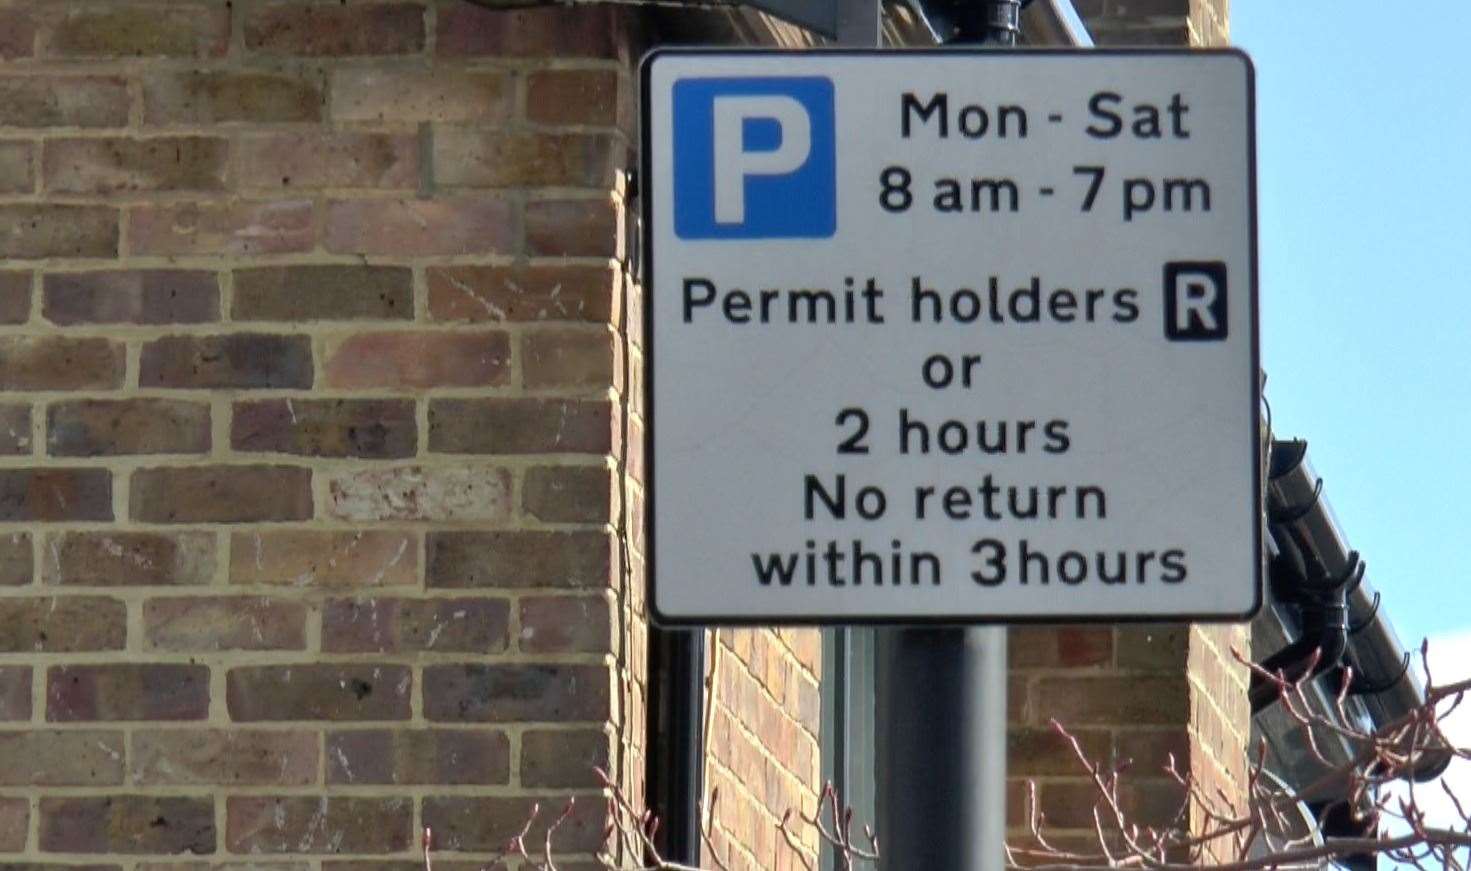 Parking permits in Canterbury have gone from £700 in 2017 to £950